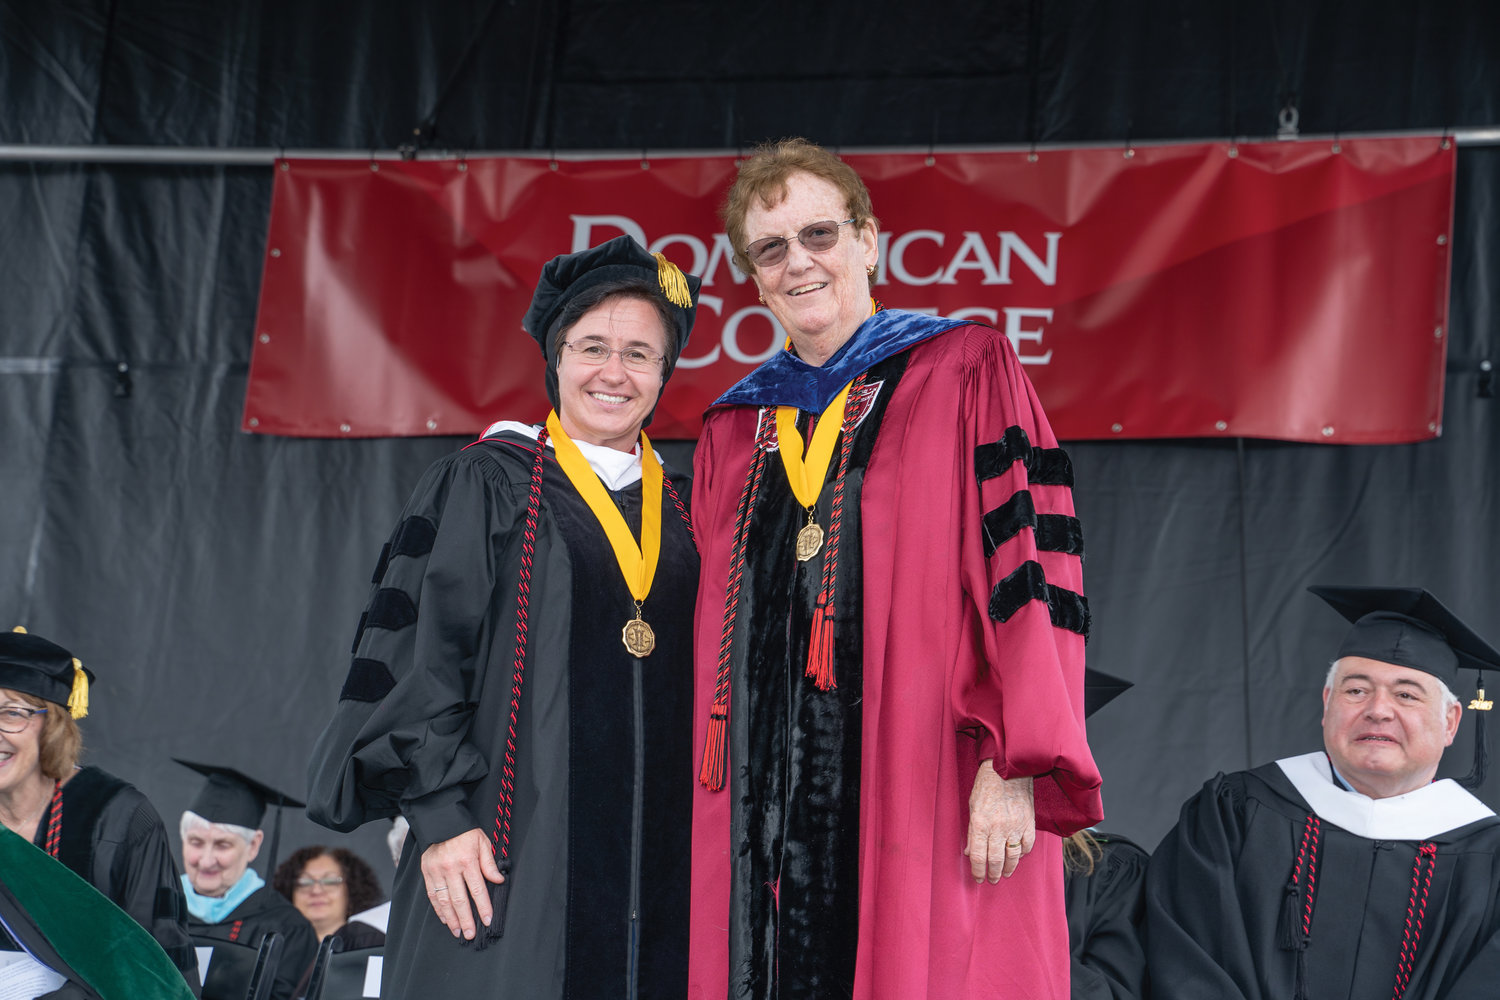 Sister Eliane Ilnitski, S.S.M., provincial superior of the Sisters Servants of Mary Immaculate, left, accepted the Veritas Medal on behalf of her religious congregation at Dominican College’s commencement May 15. She is with Sister Mary Eileen O’Brien, O.P., the college president.